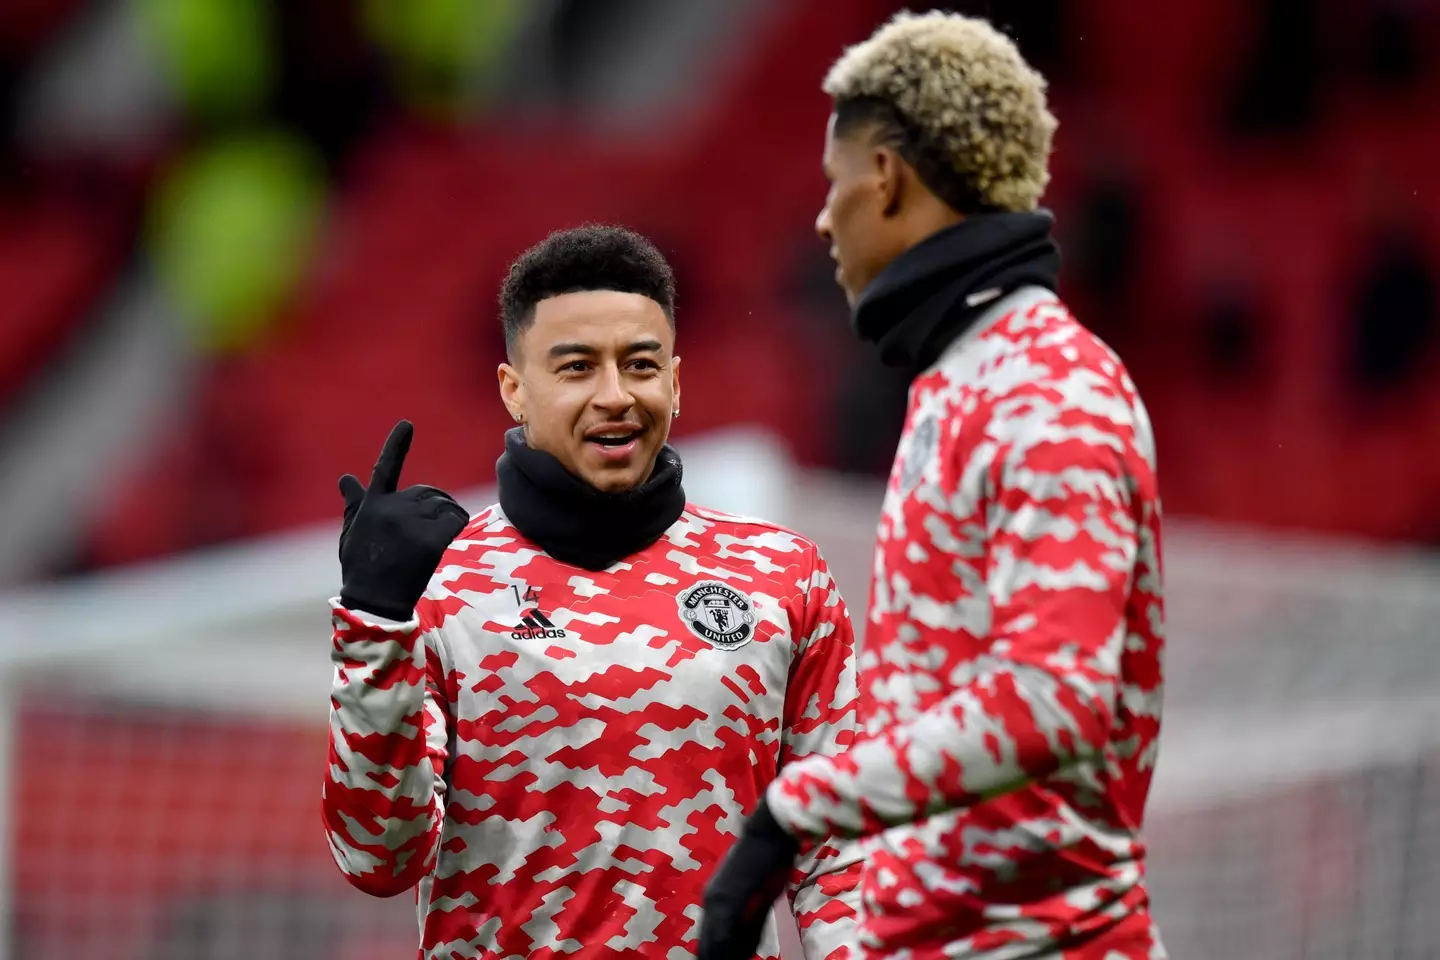 Lingard and Rashford are at the forefront of what went wrong this season, for differing reasons. Image: PA Images